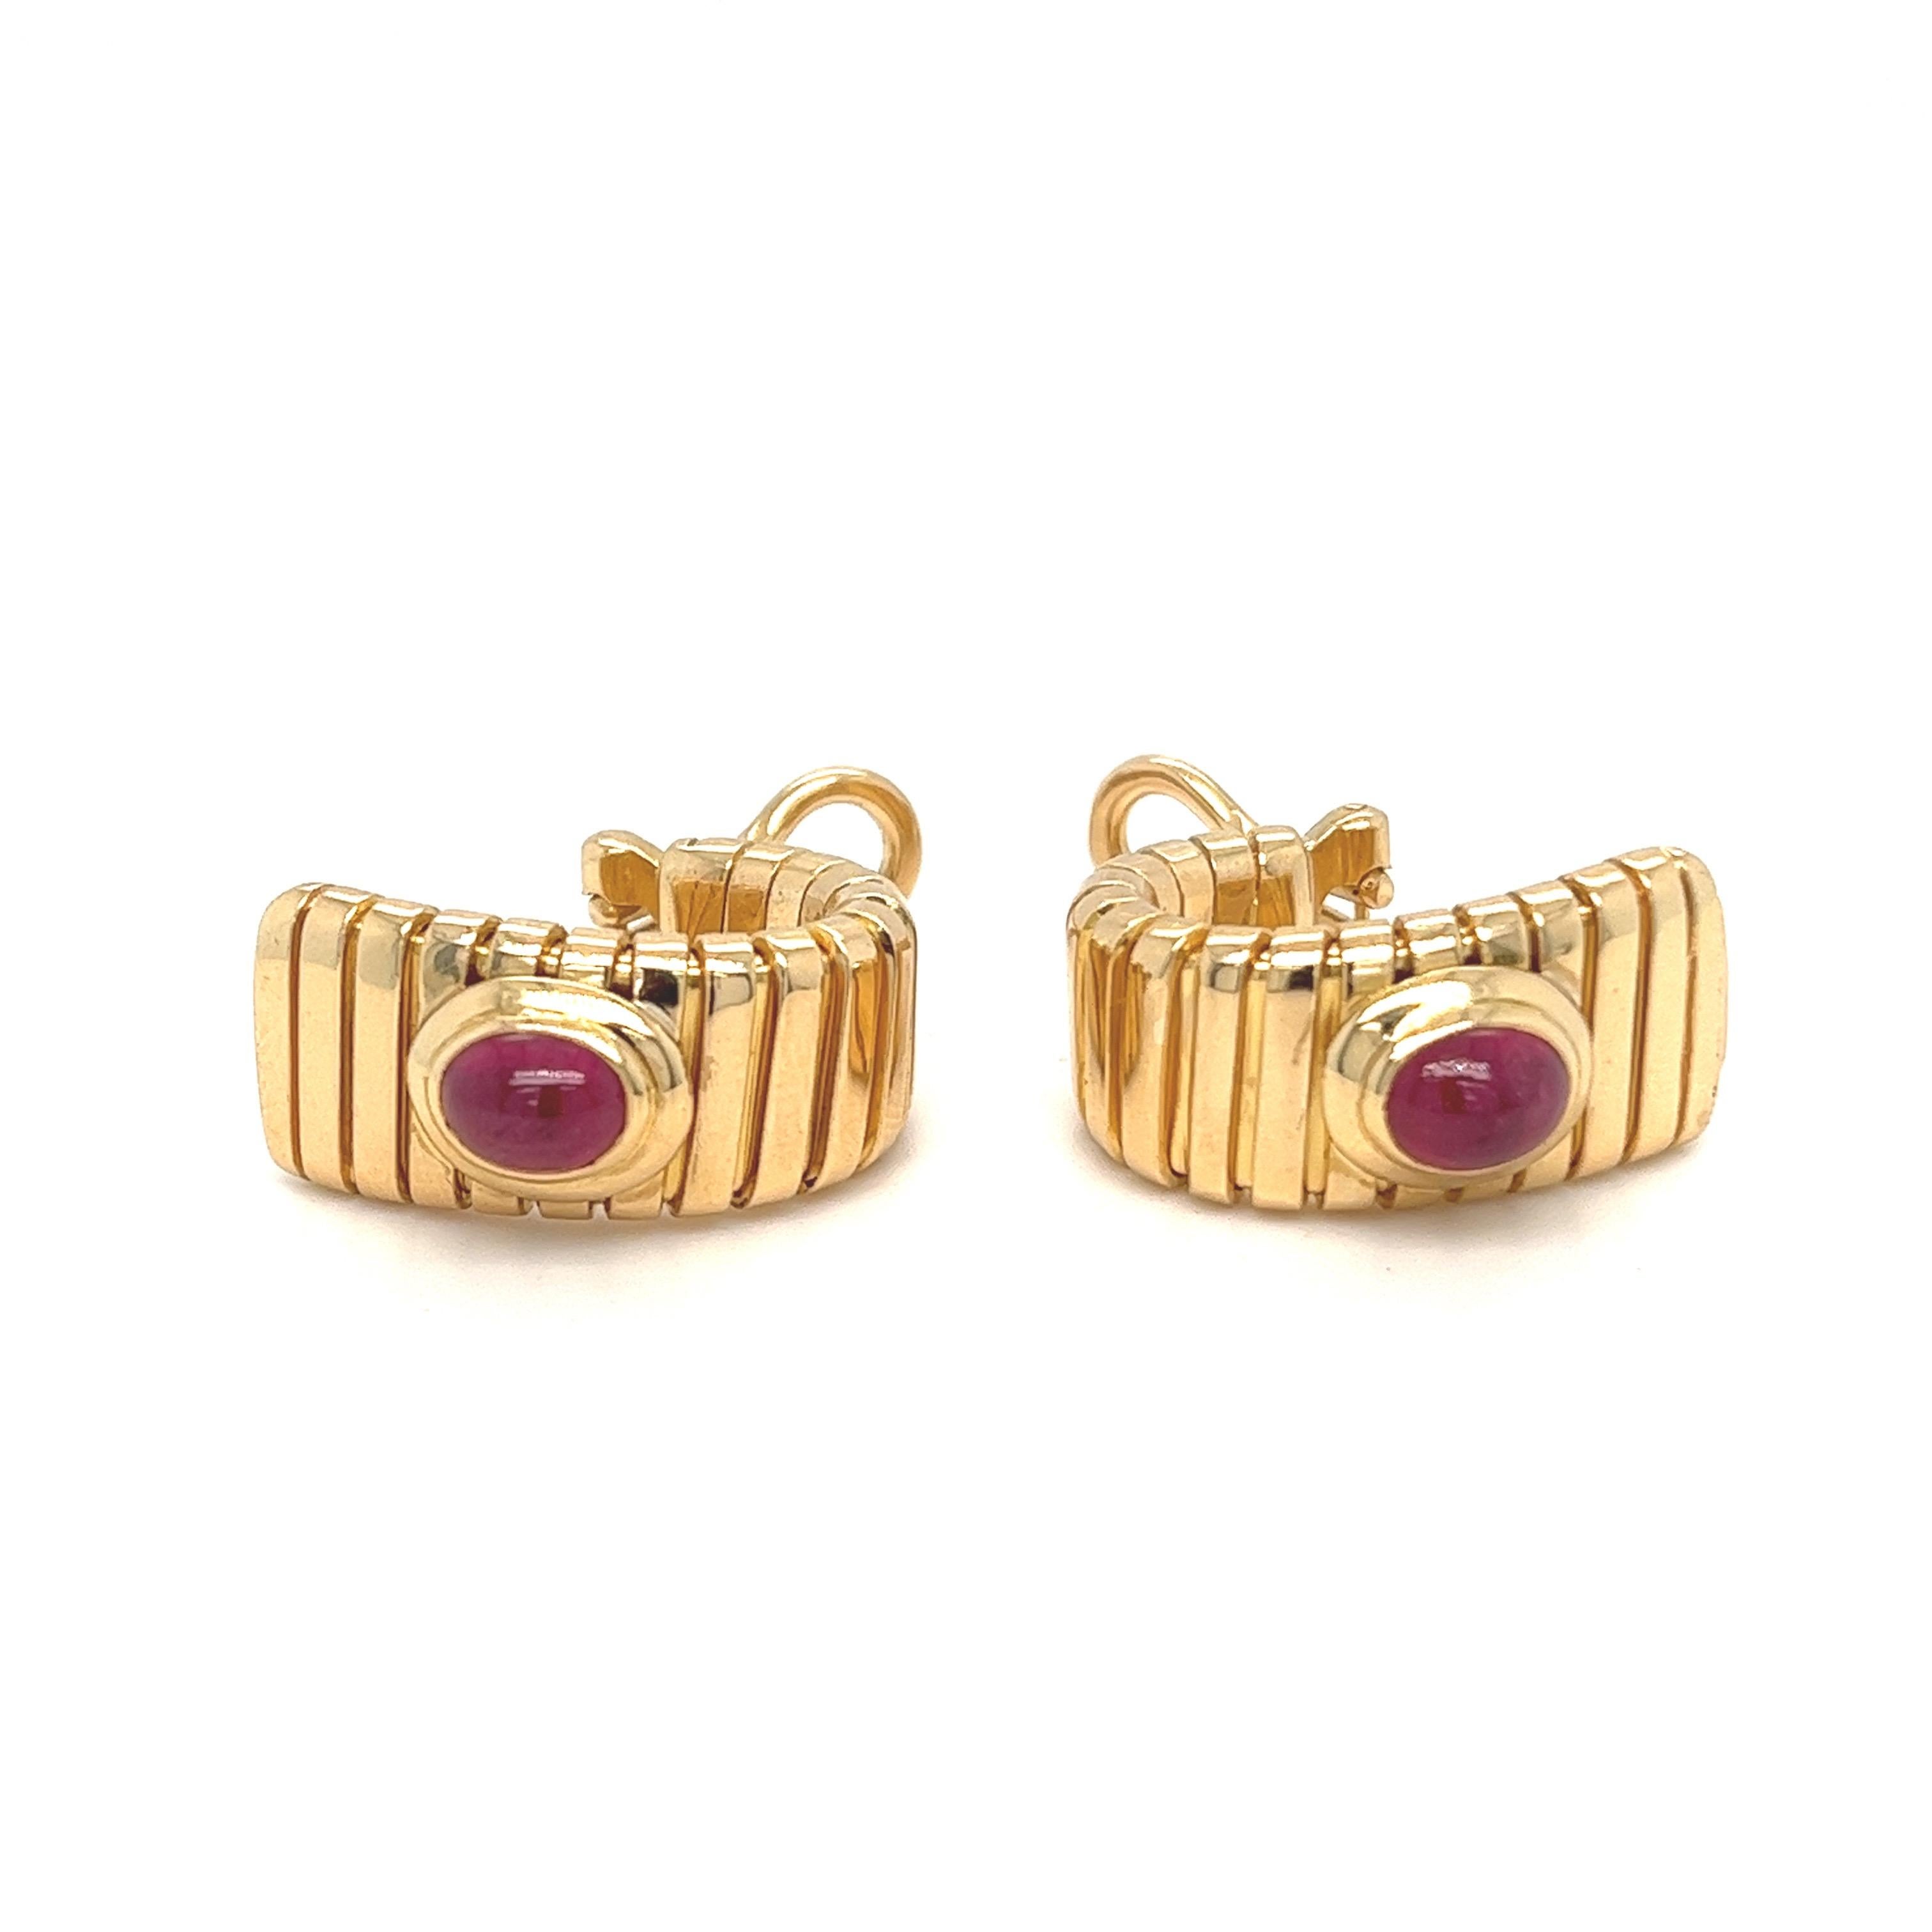 Casual chic pair of 18 karat yellow gold and ruby Tubogas half hoop earrings by the Italian brand Bvlgari, 1990s.
Crafted in 18 karat yellow gold, each set with an oval ruby cabochon of circa 0.6 carats, these earrings are completed by comfortable